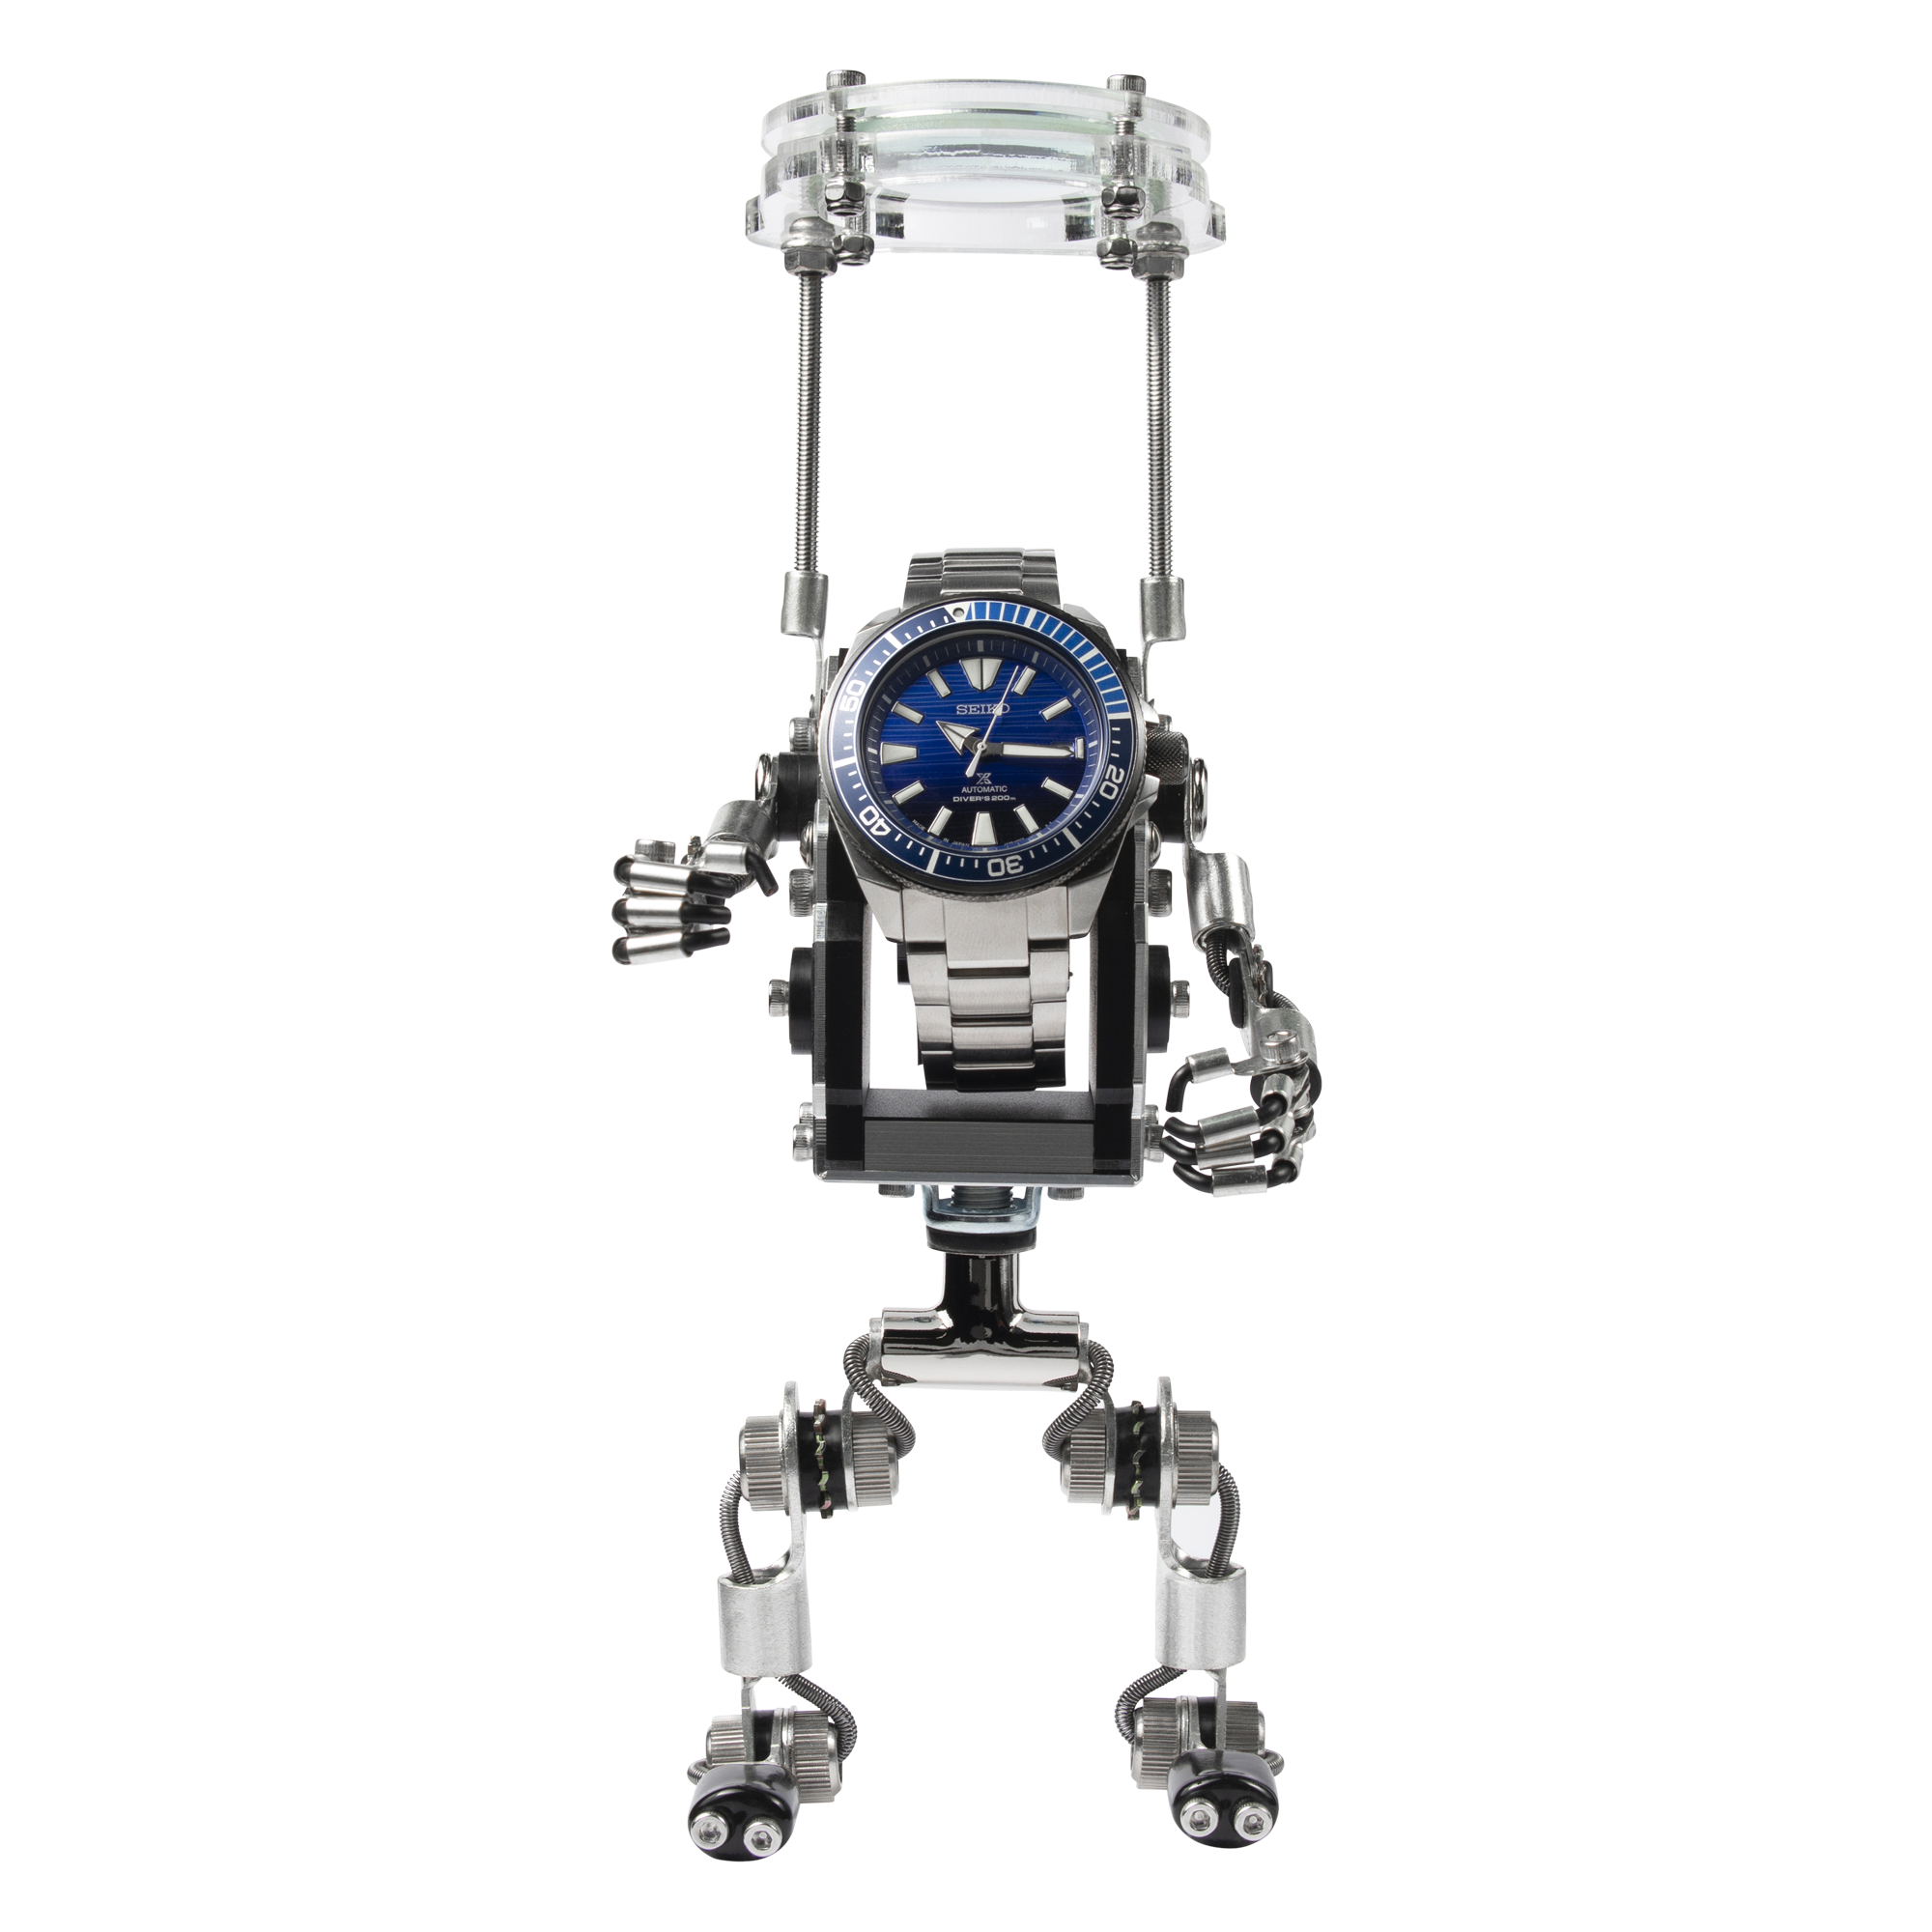 [RoboToys] Watch Stand - RoboMech - Black with Magnifier